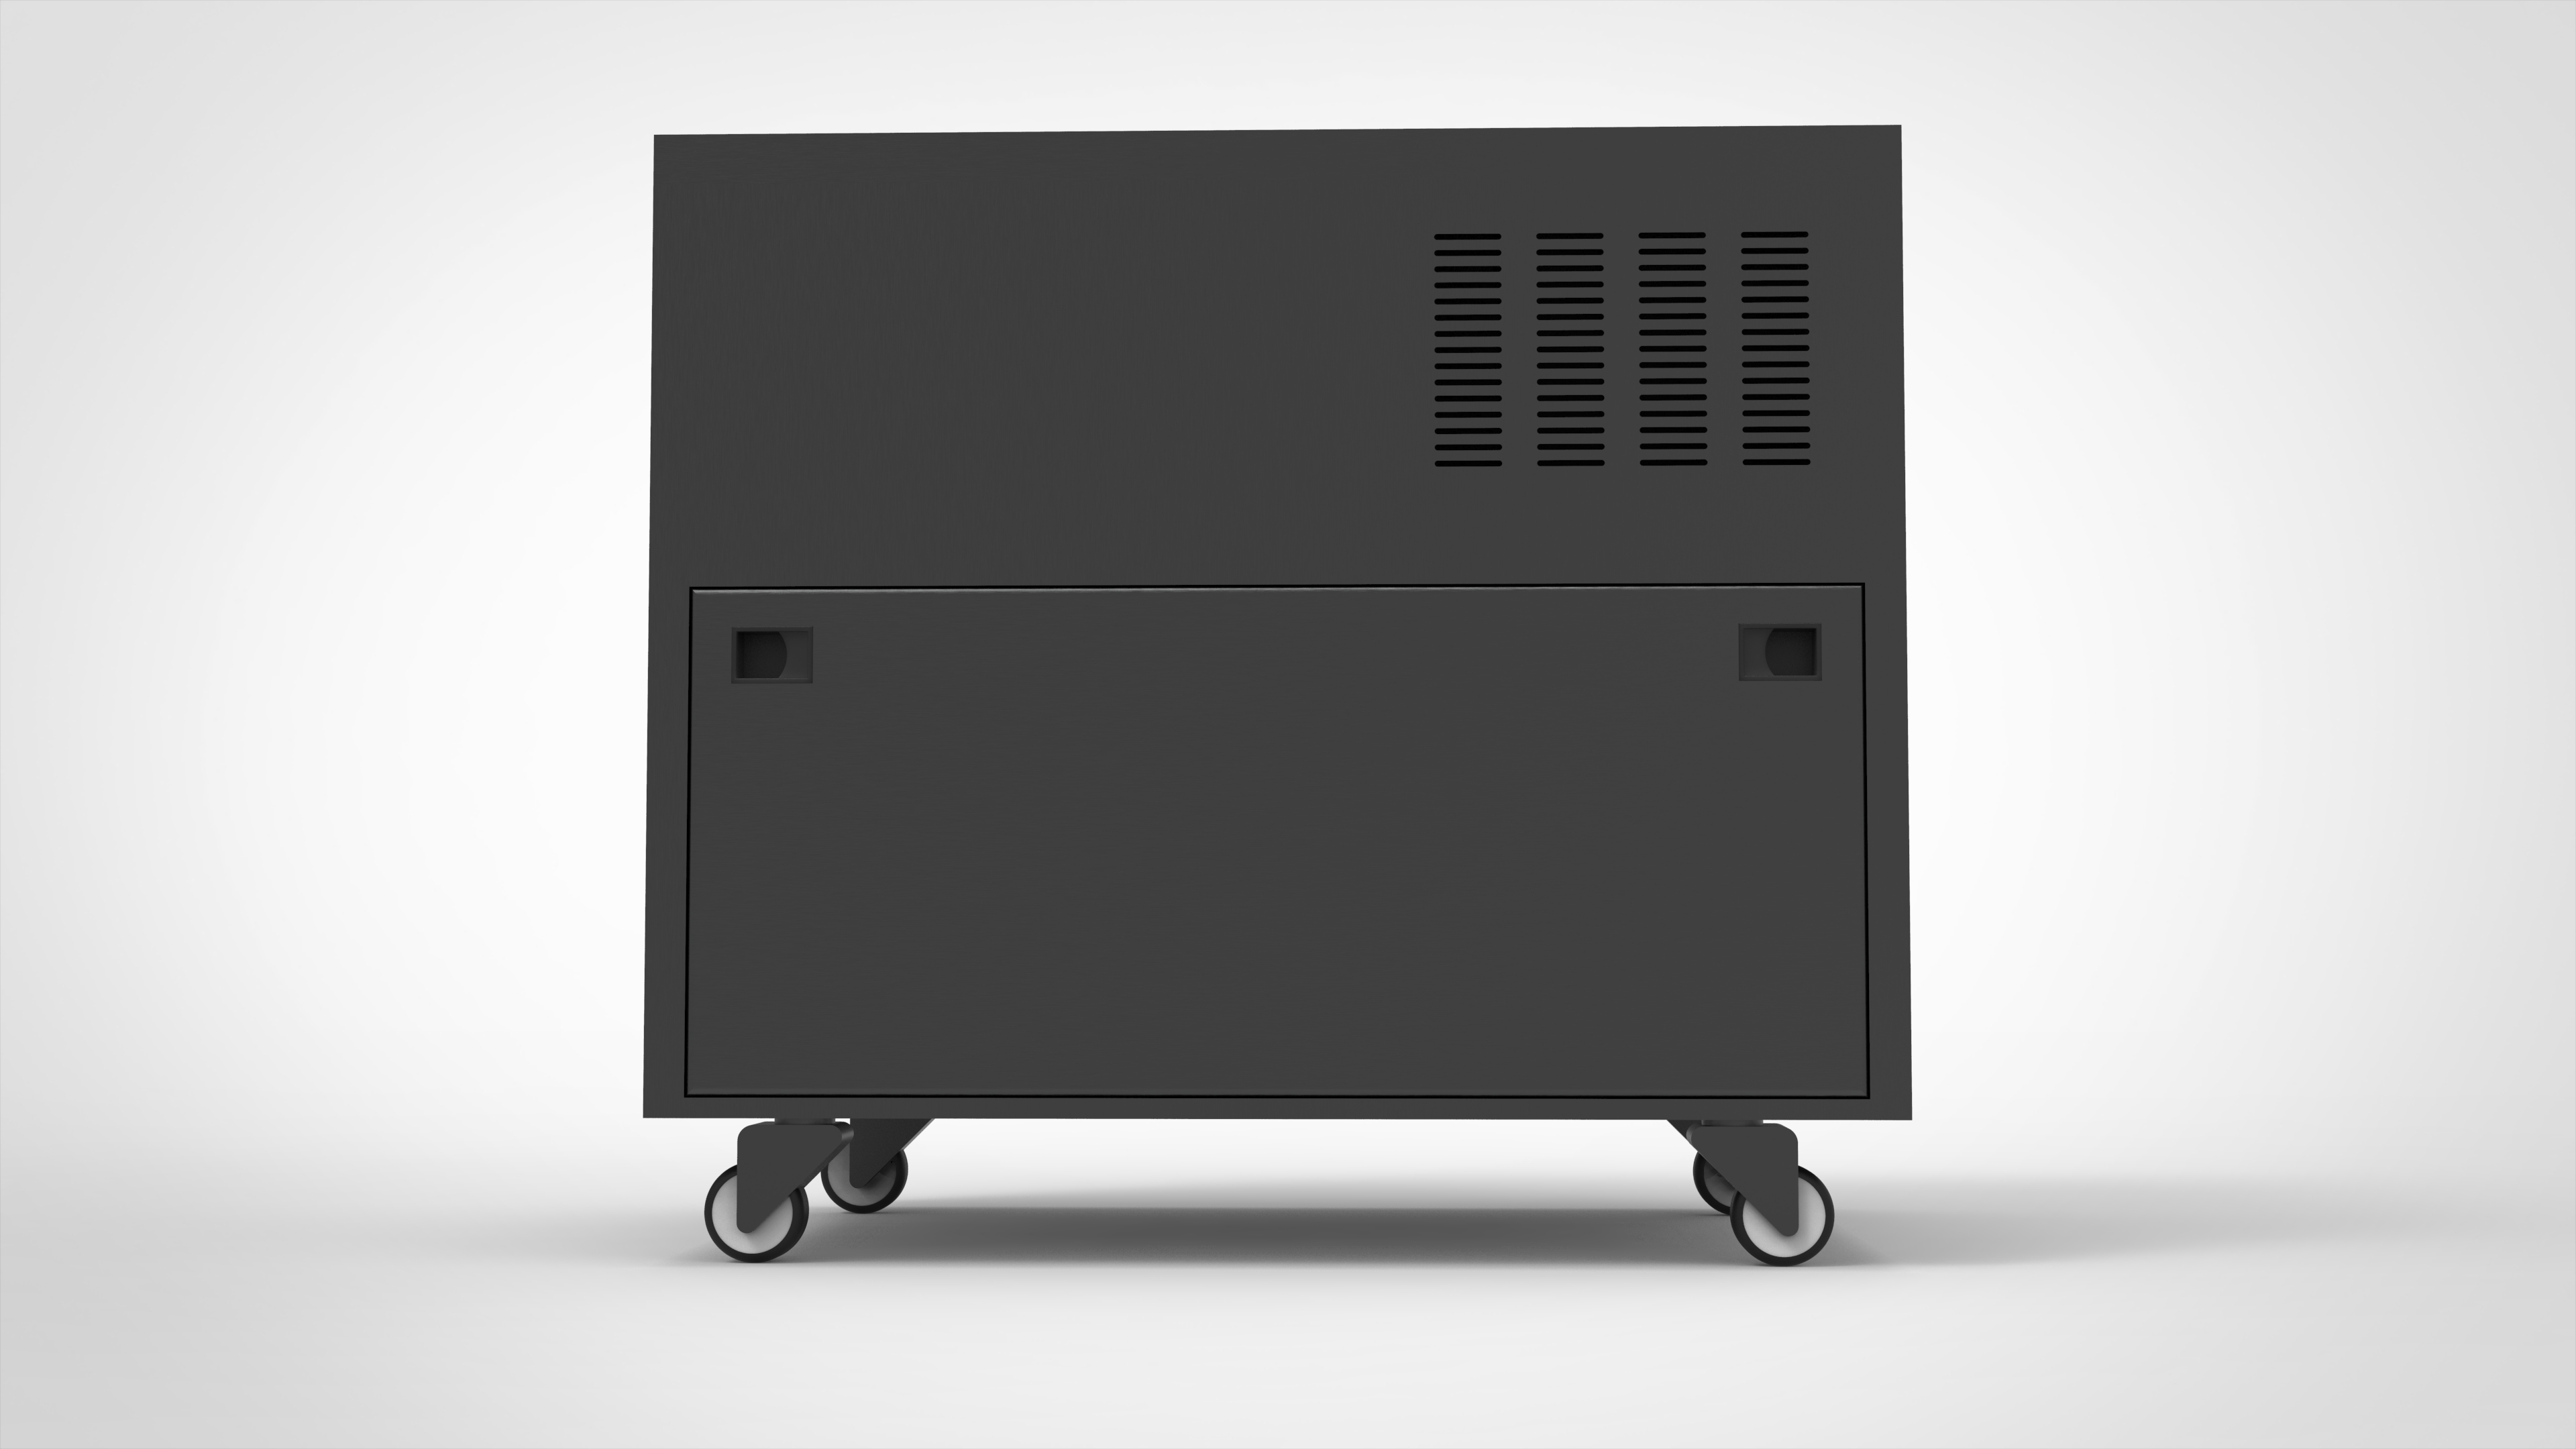 3000w 220v High Capacity in One Solar Power System for Cars